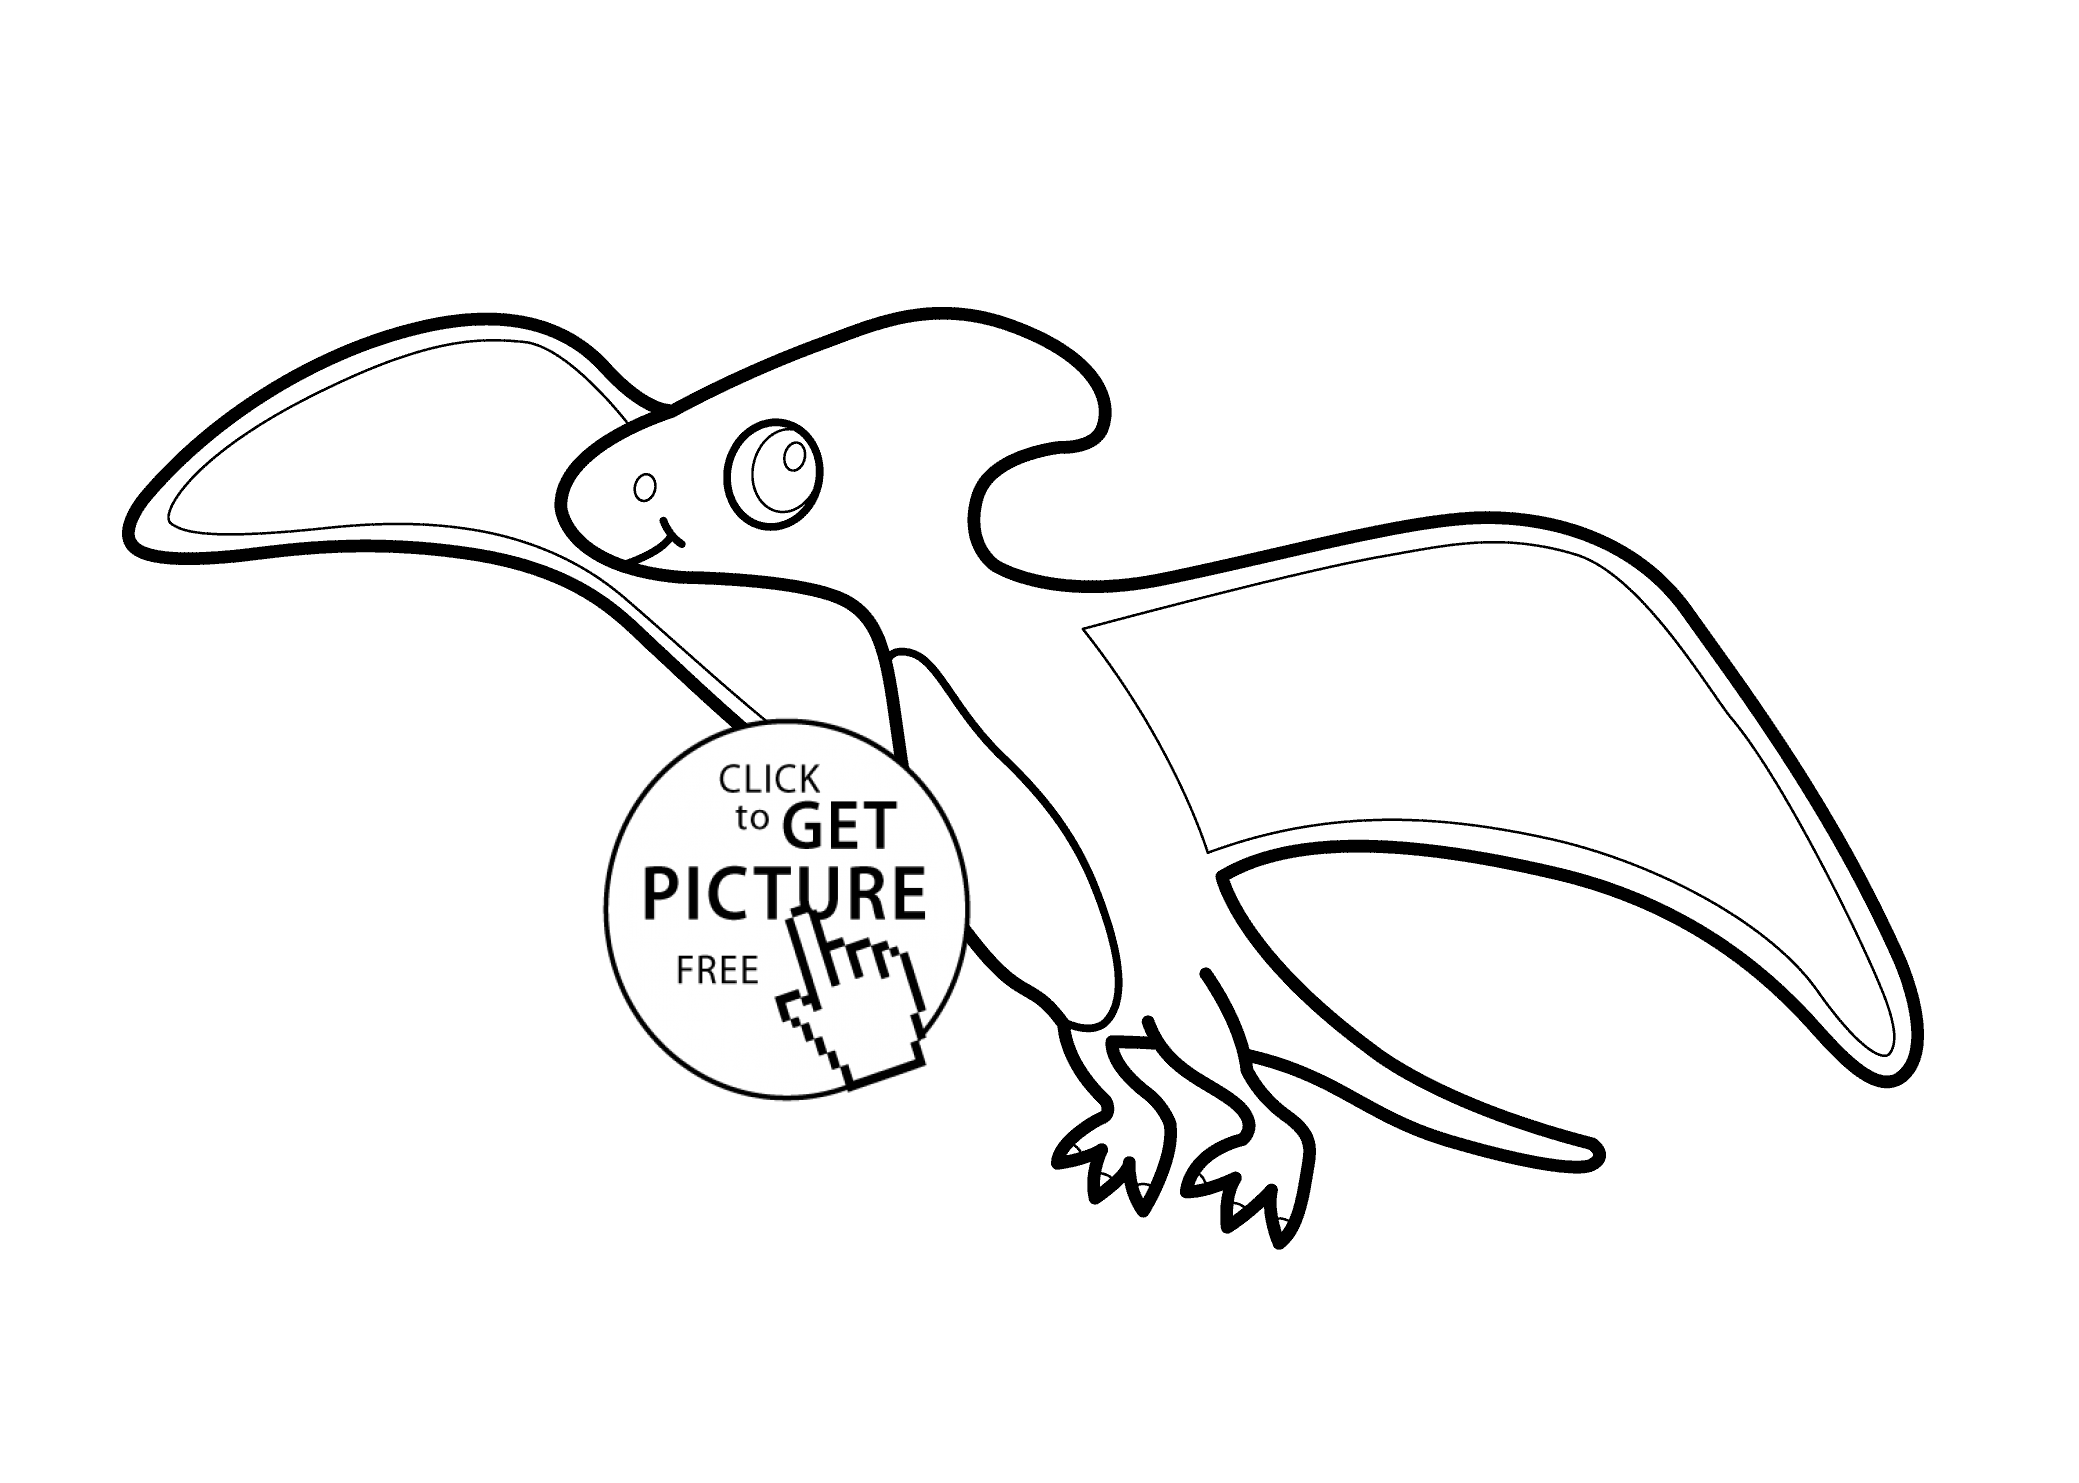 Free Pteranodon Coloring Page, Download Free Pteranodon Coloring Page